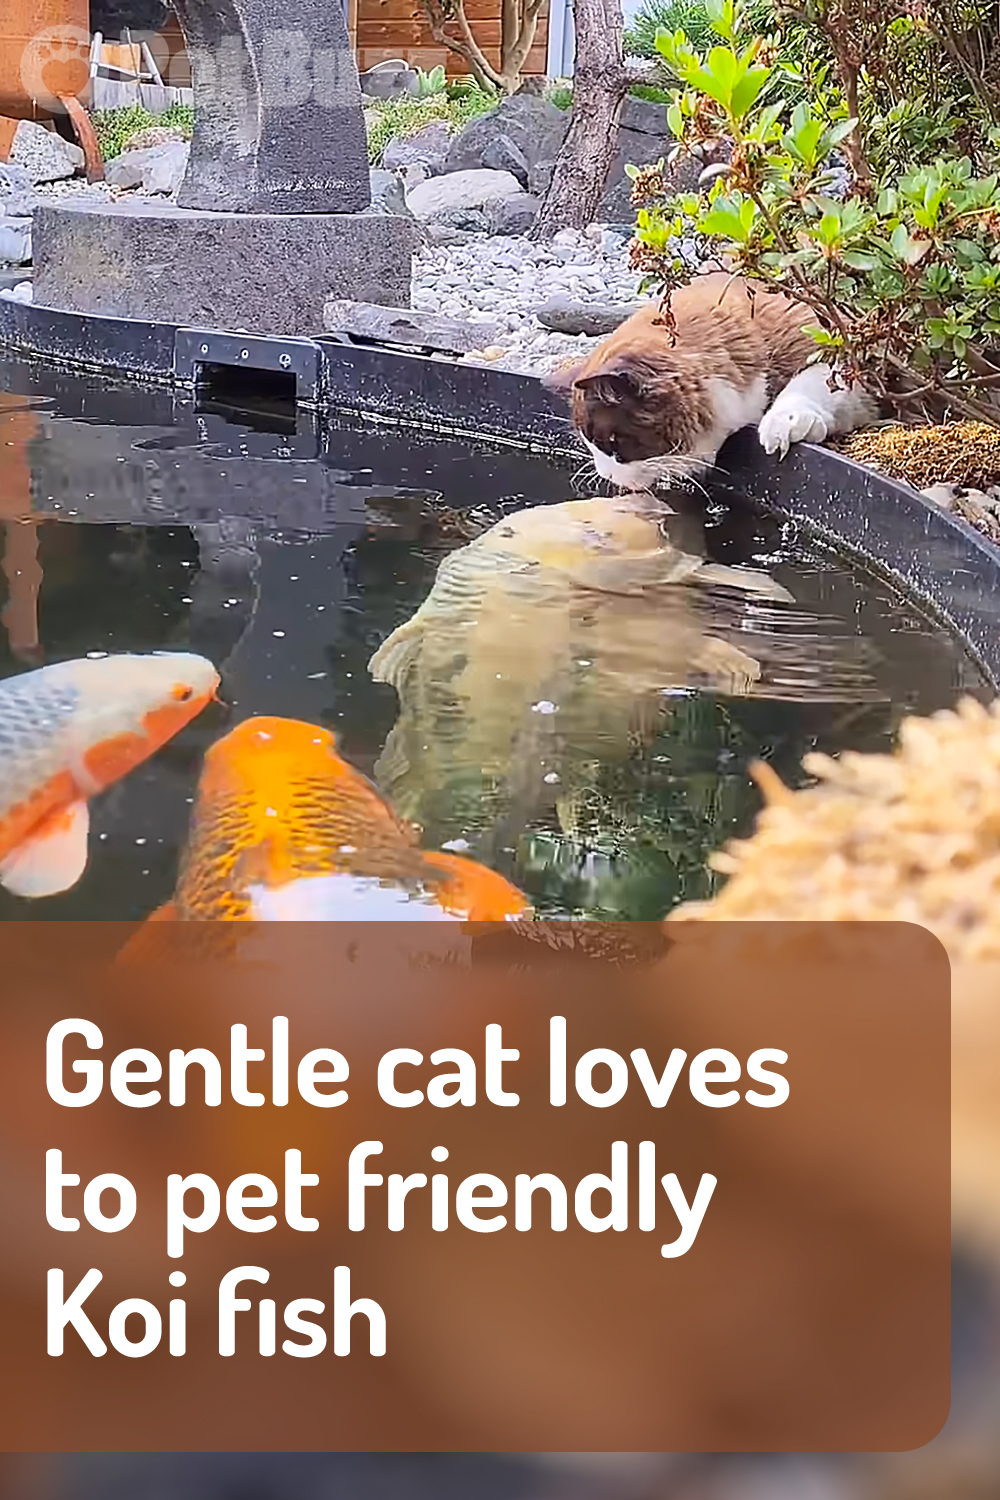 Gentle cat loves to pet friendly Koi fish